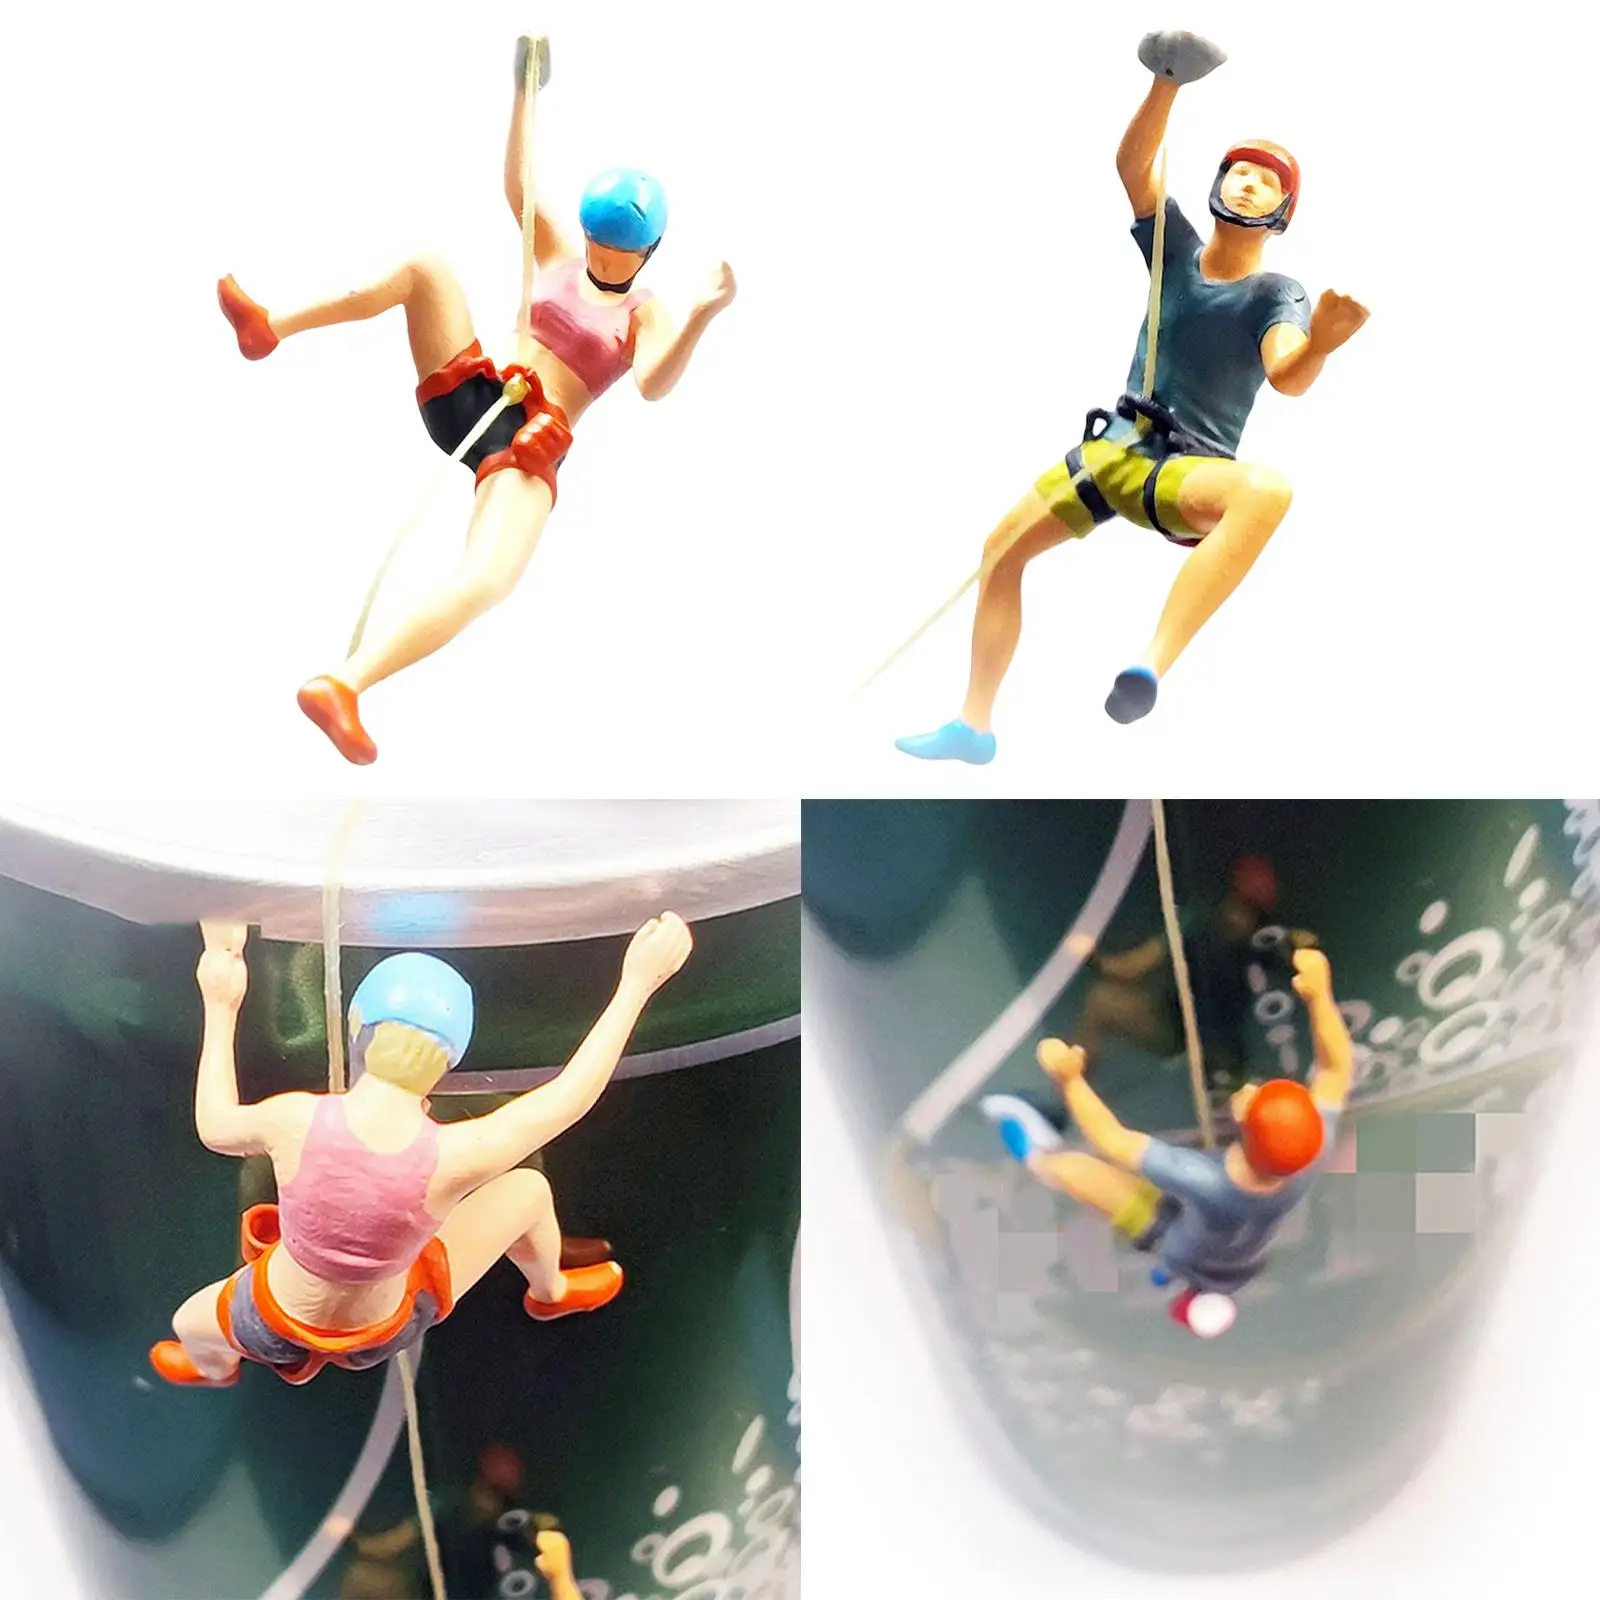 Resin Climbing People Figurines Tiny People Toys for Miniature Scene DIY Projects